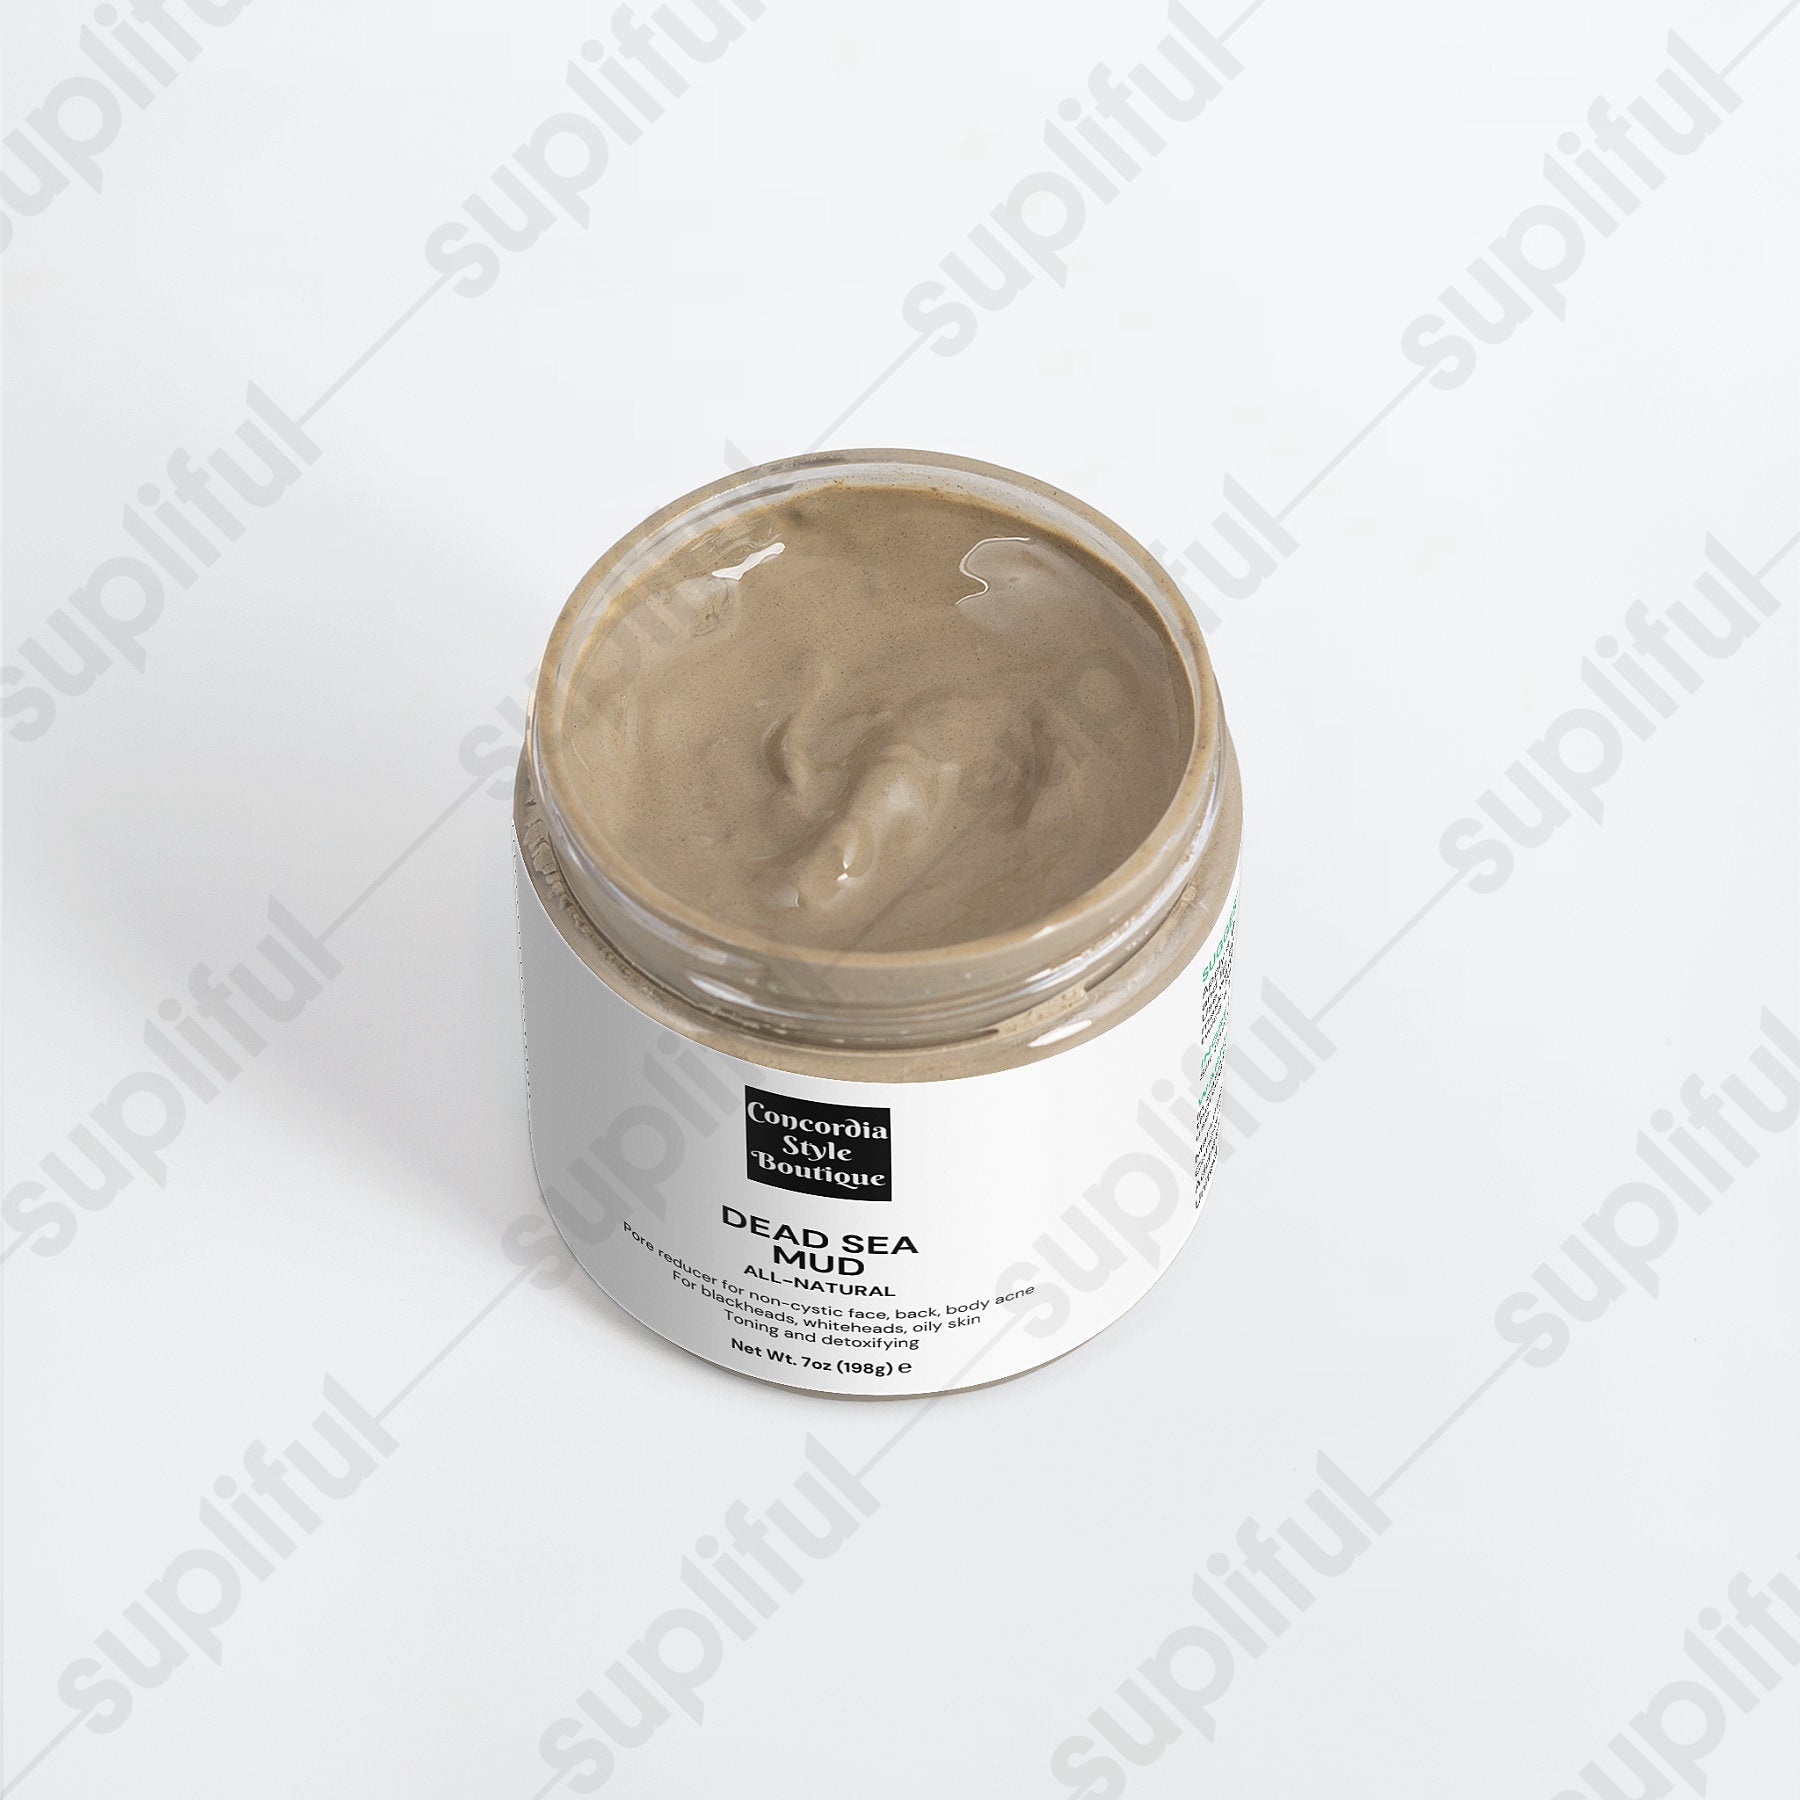 Dead Sea Mud - Ships exclusively to US - Premium Dead Sea Mud from Concordia Style Boutique - Just $23.95! Shop now at Concordia Style Boutique